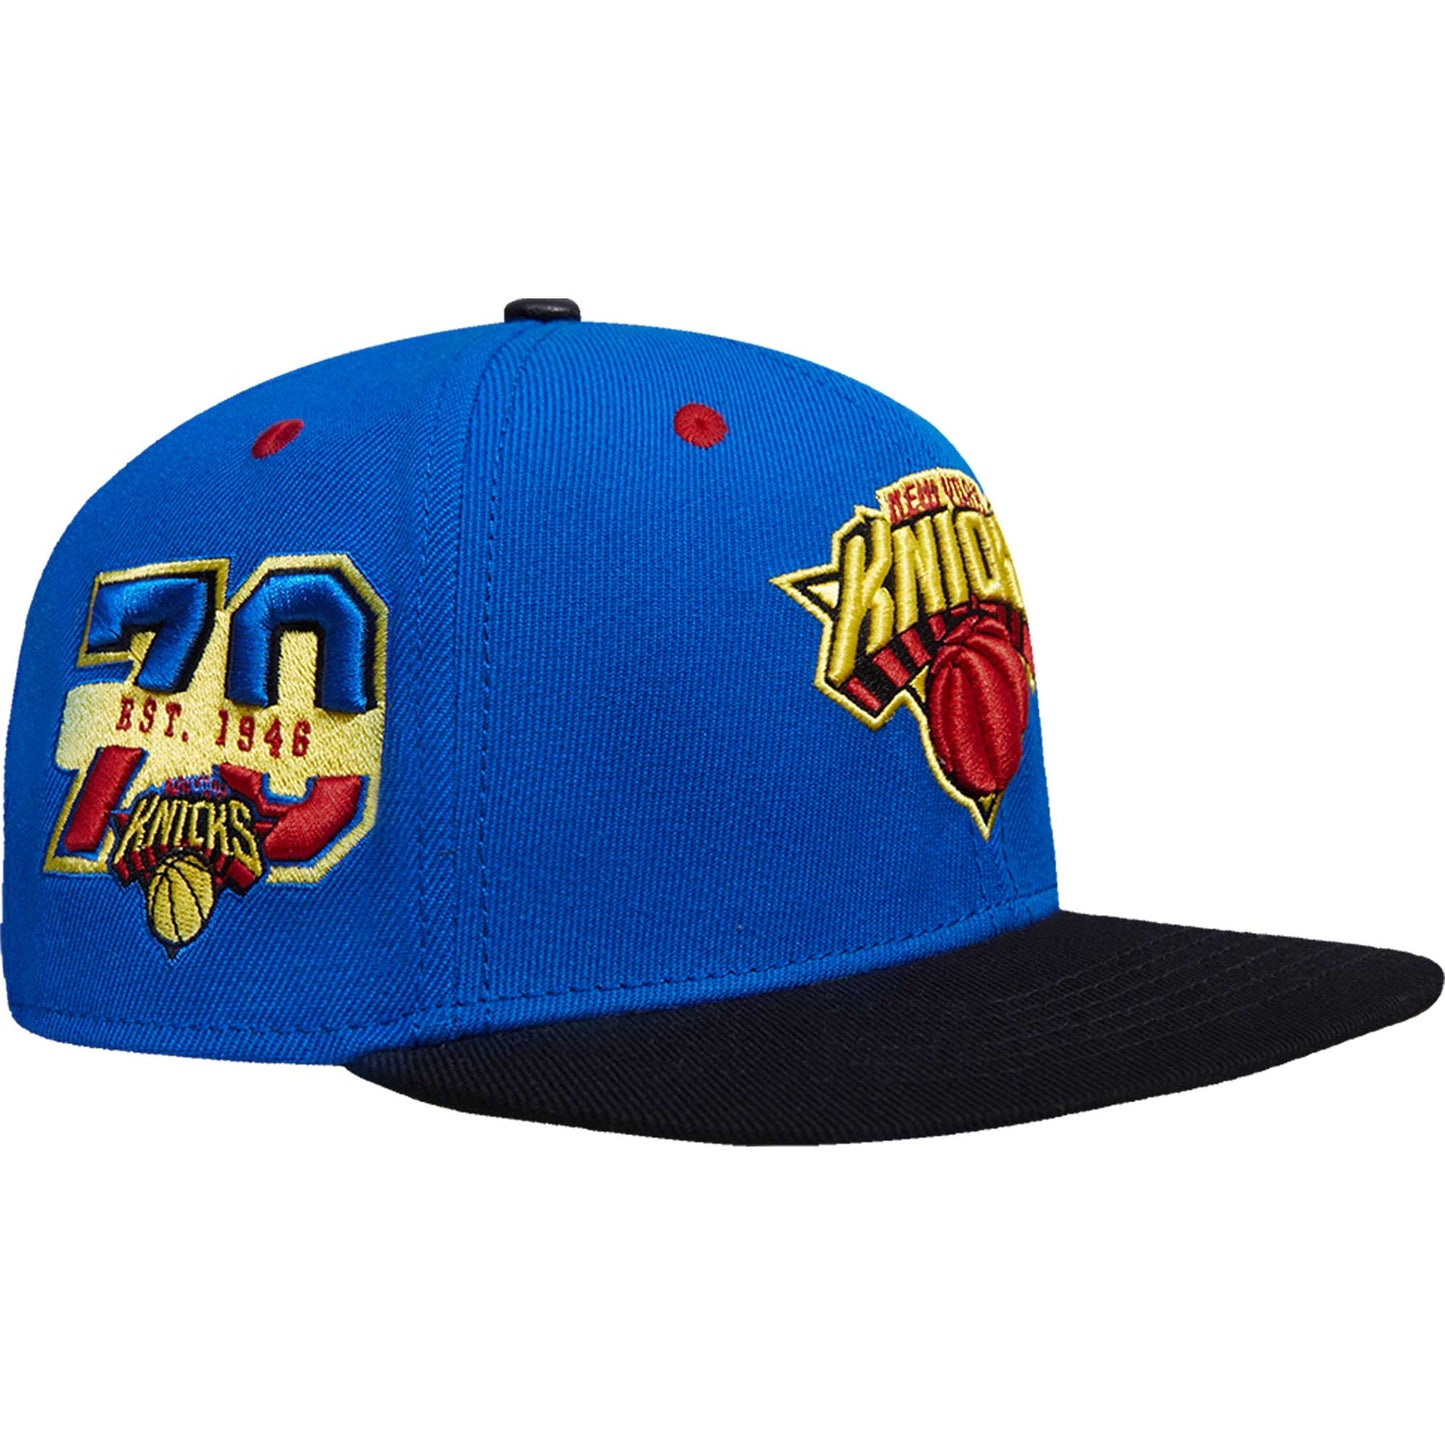 New York Knicks Pro Standard 70 Years Any Condition Snapback Hat - Royal